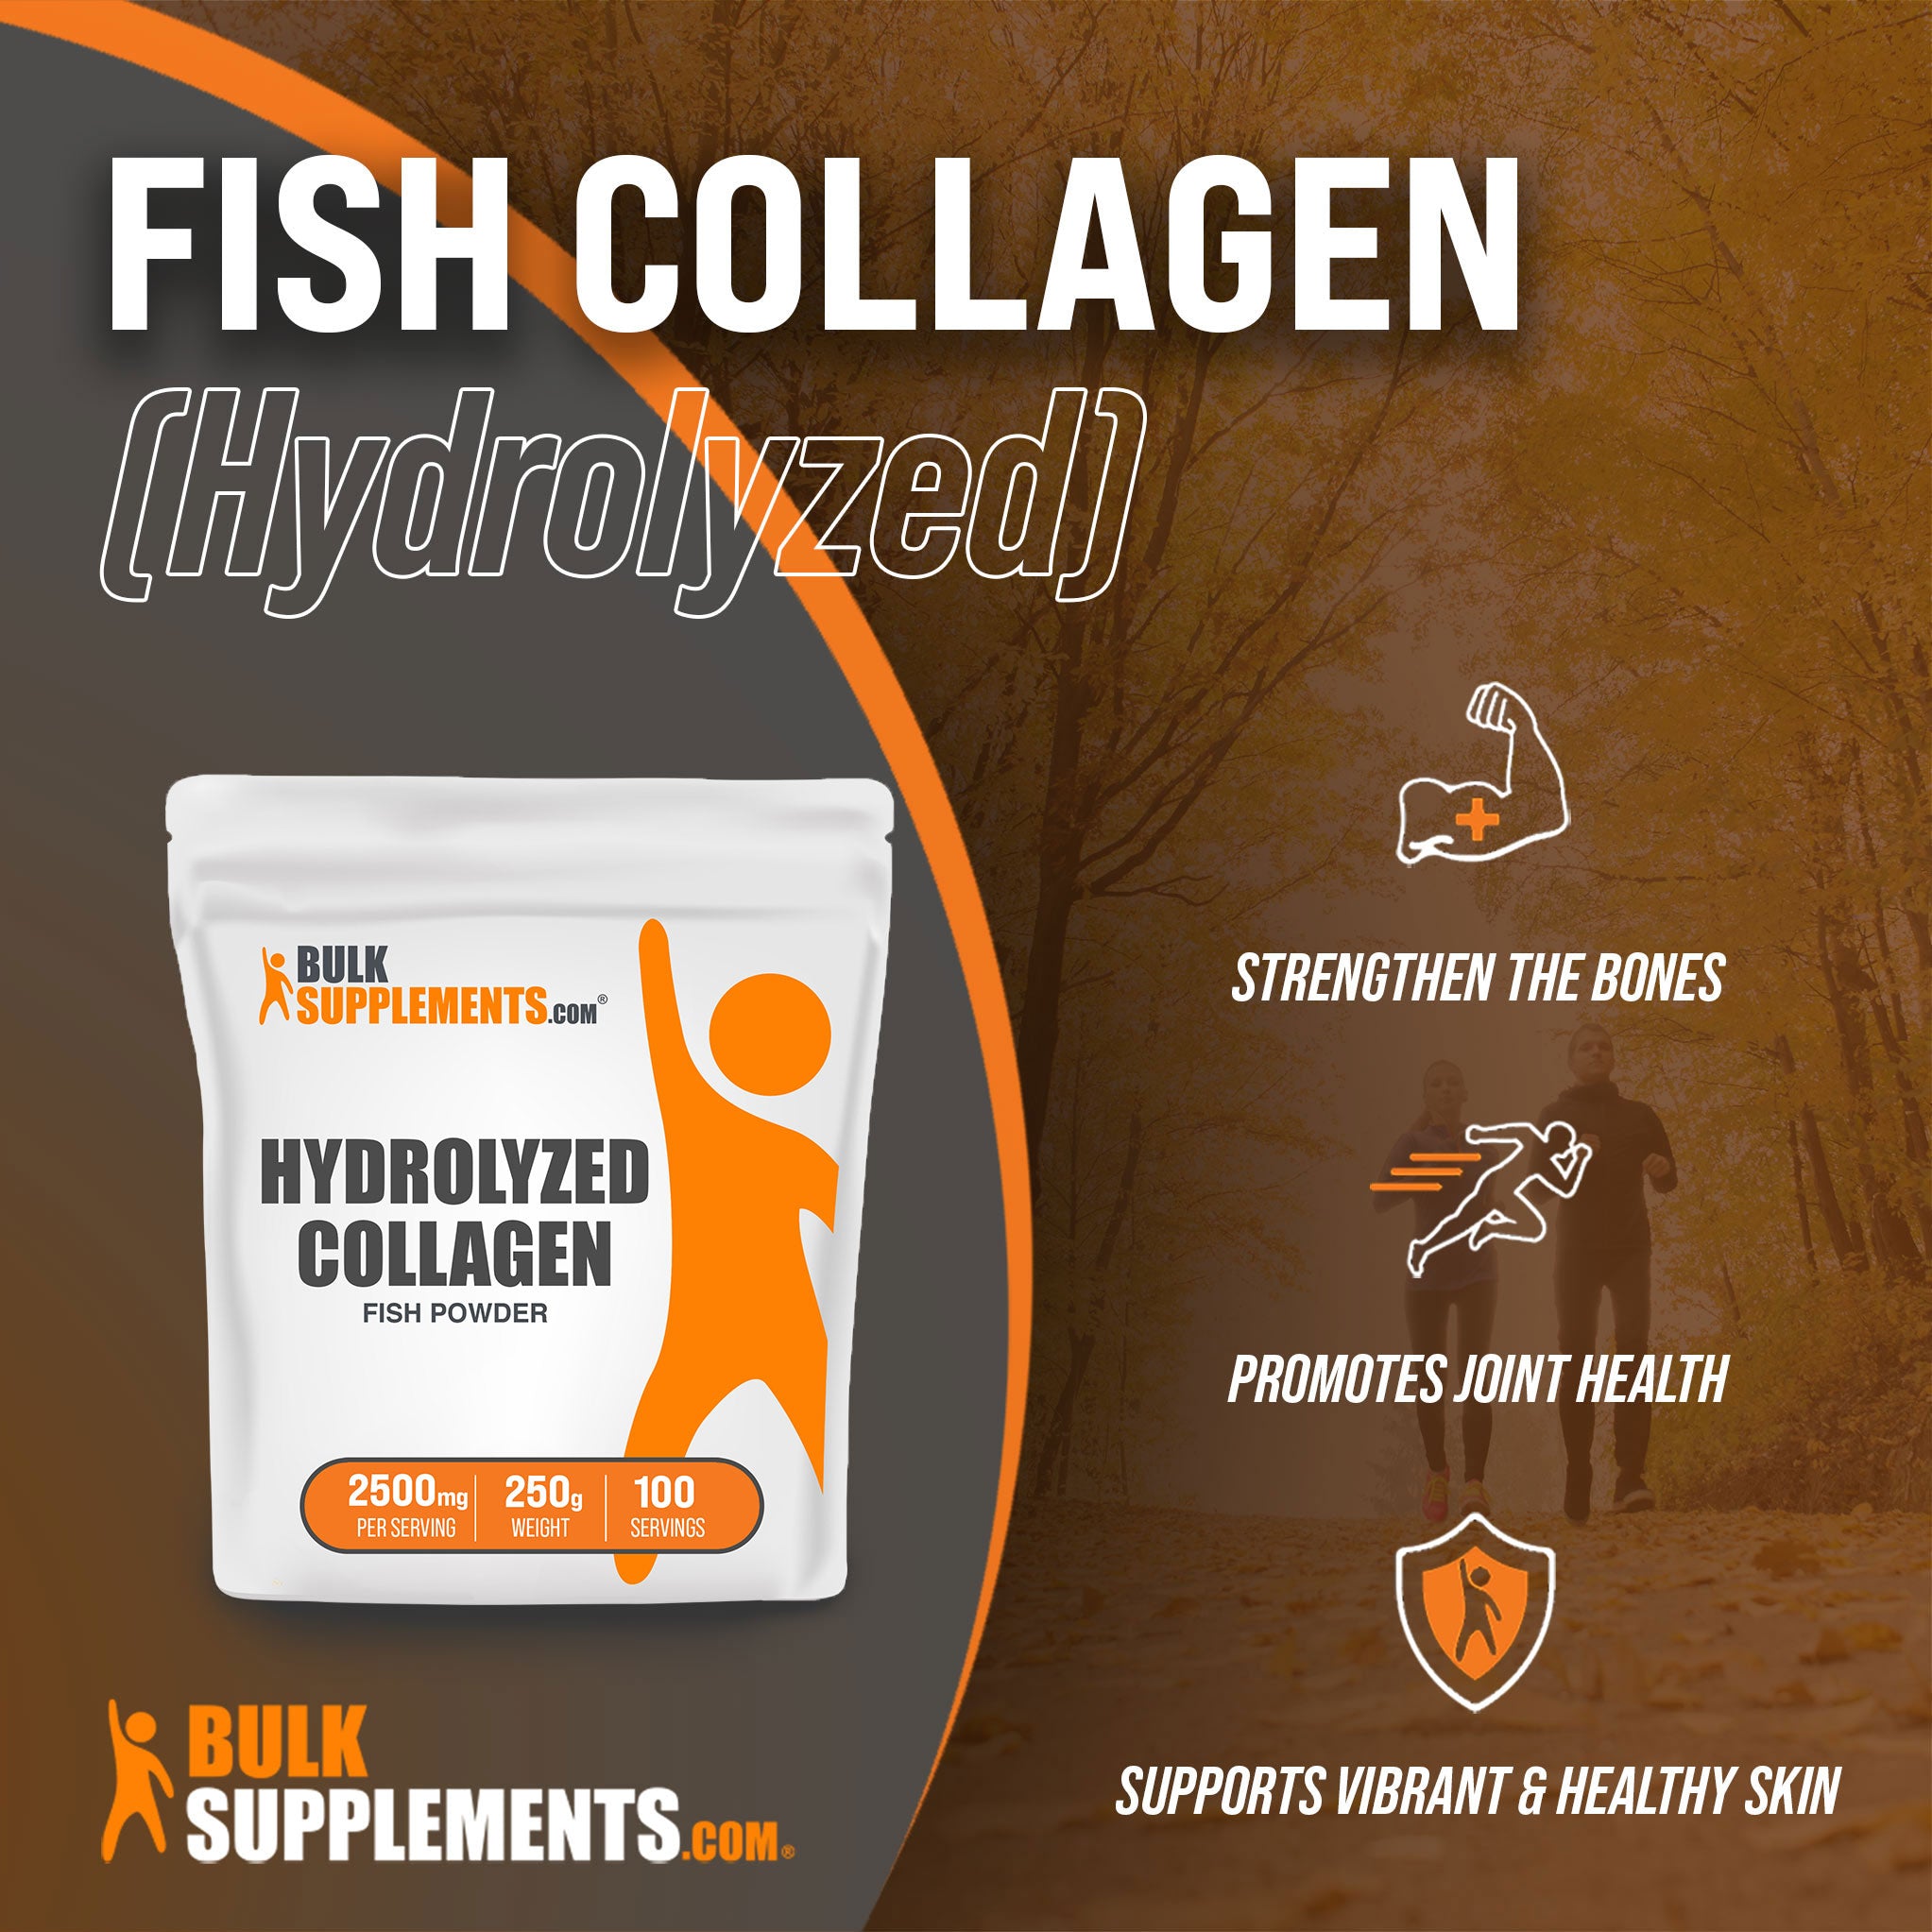 Benefits of Fish Collagen Hydrolyzed; strengthen the bones, promotes joint health, supports vibrant and healthy skin